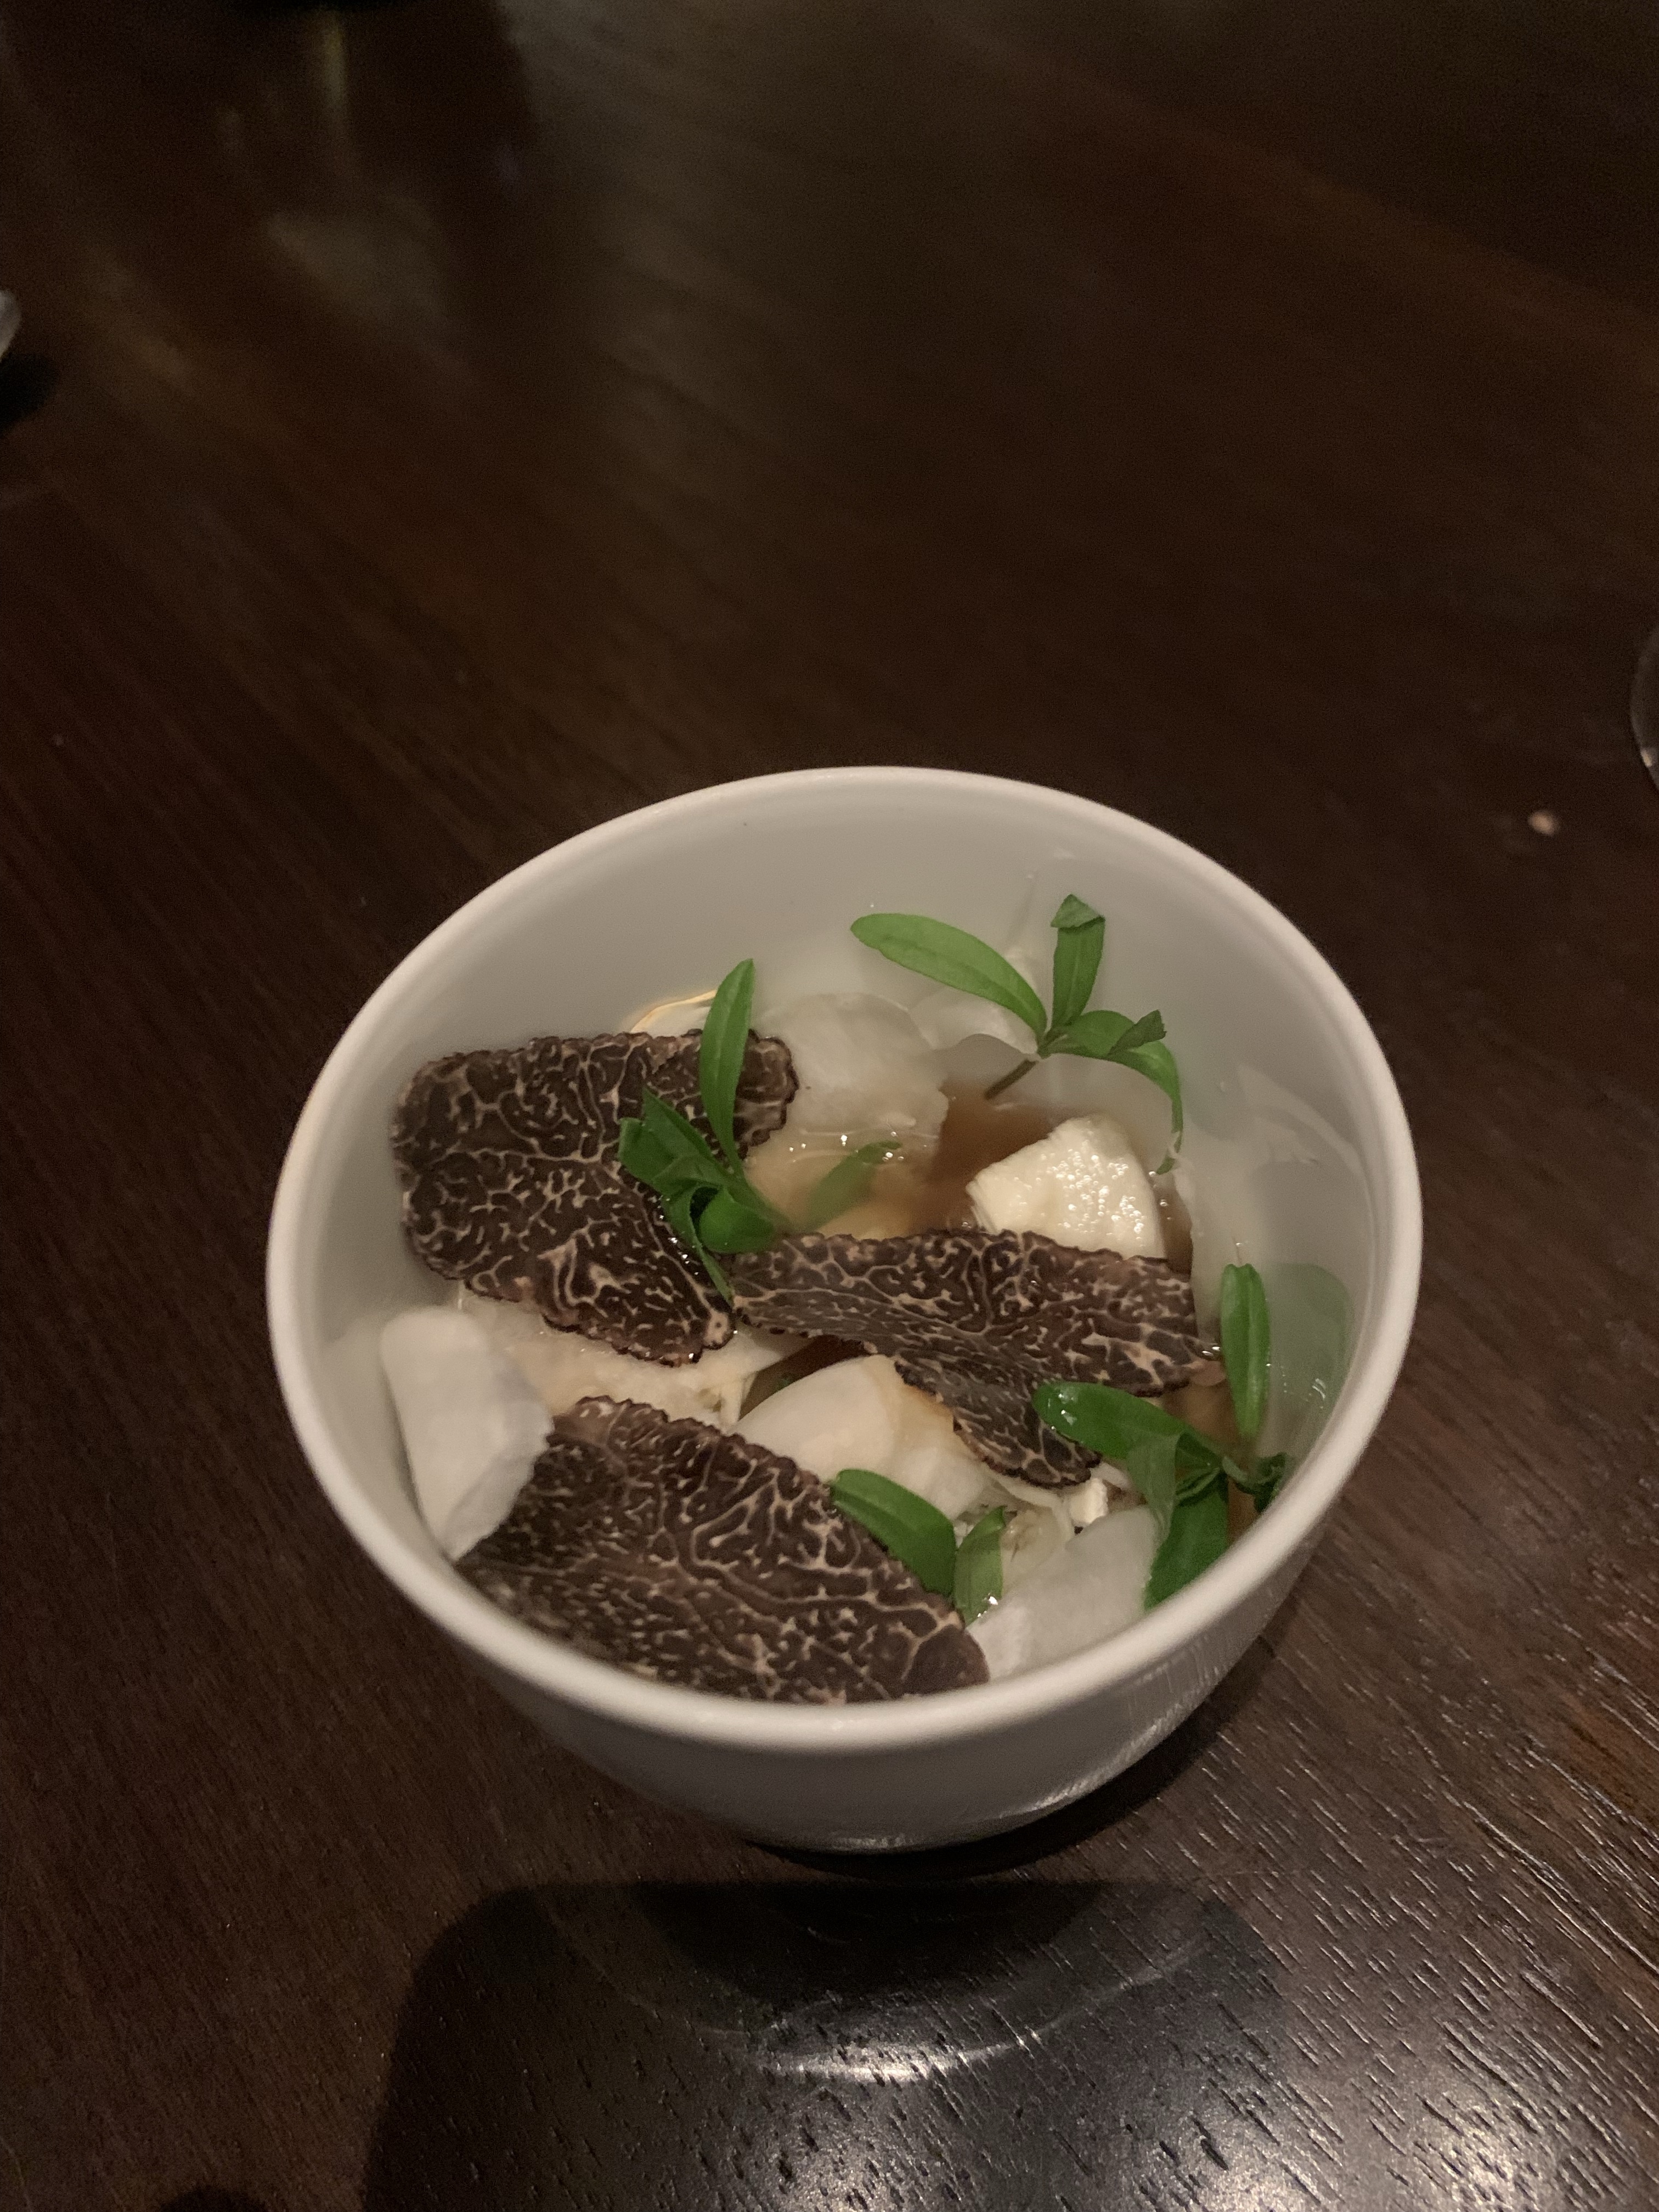 Shaved black truffle in a bowl topping custard cubes, with a broth in the bottom of the bowl